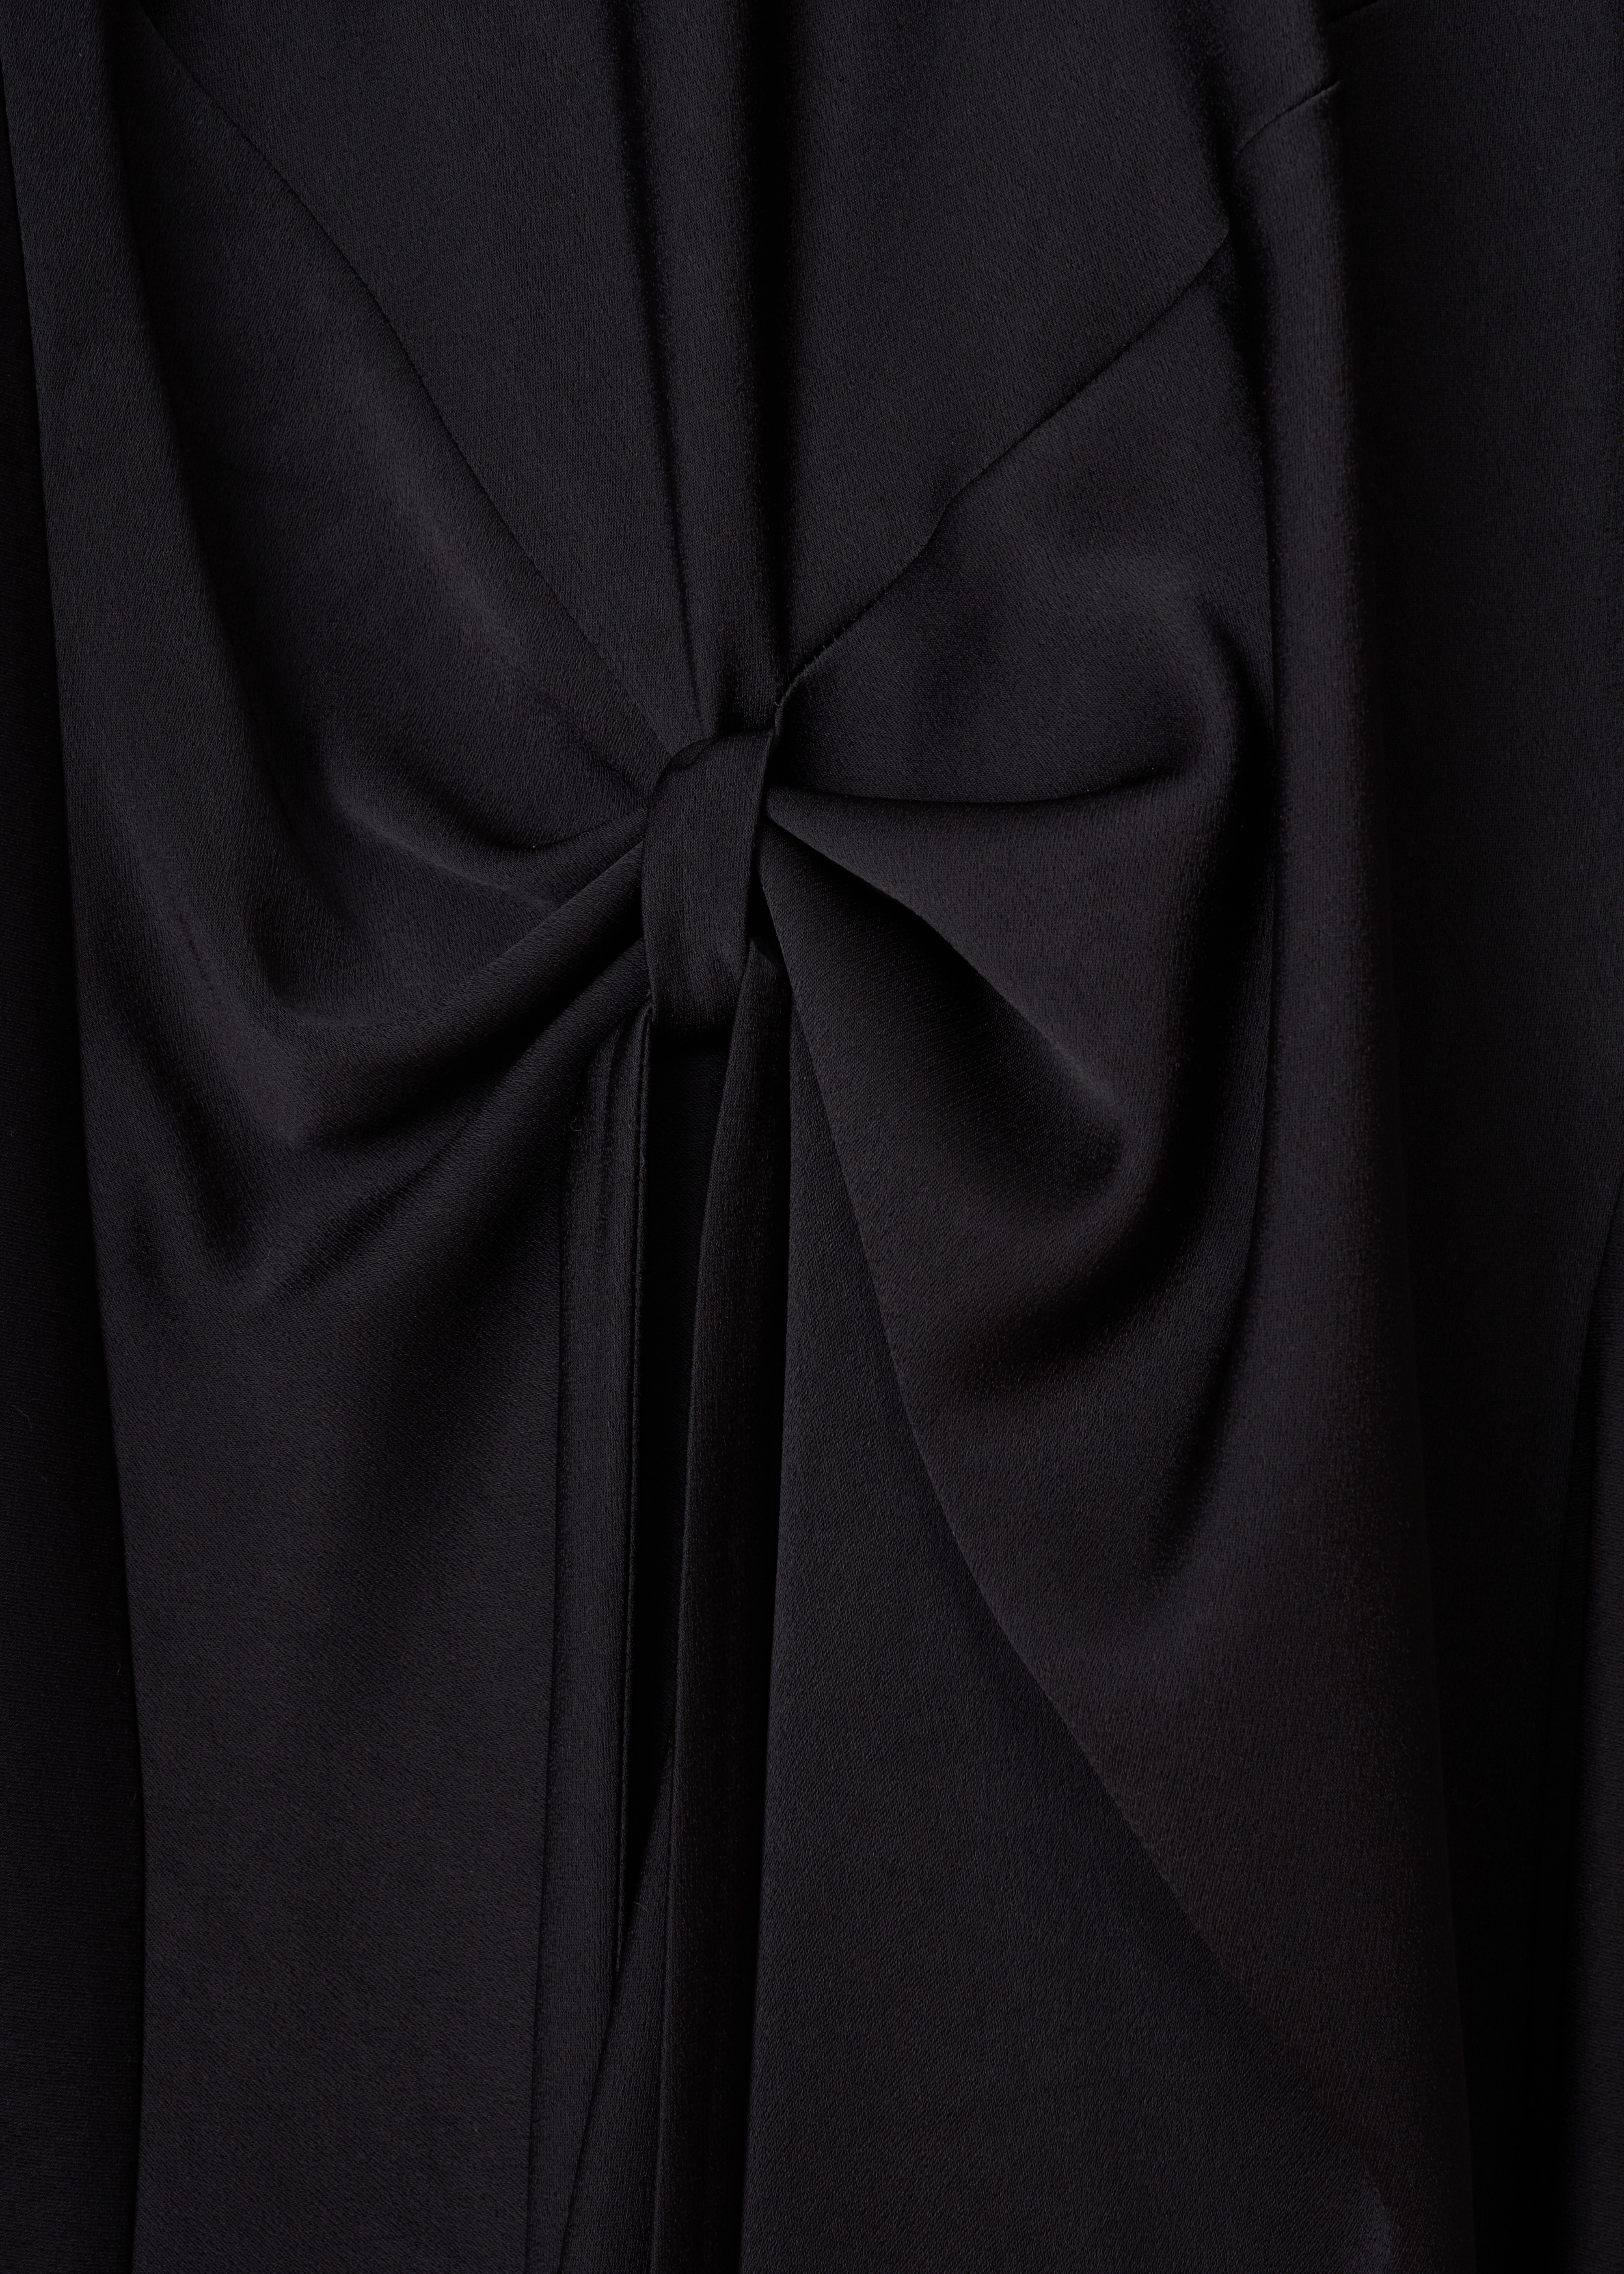 ChloÃ© Bow detail black dress CHC19ARO62138001_001_Black detail. Black dress with long sleeves and a round neckline. Fitted bodice,  with a gathered bow-like detail at the front. The skirt part has an A-line and a midi-length. The fastening at the back is an invisible zipper.